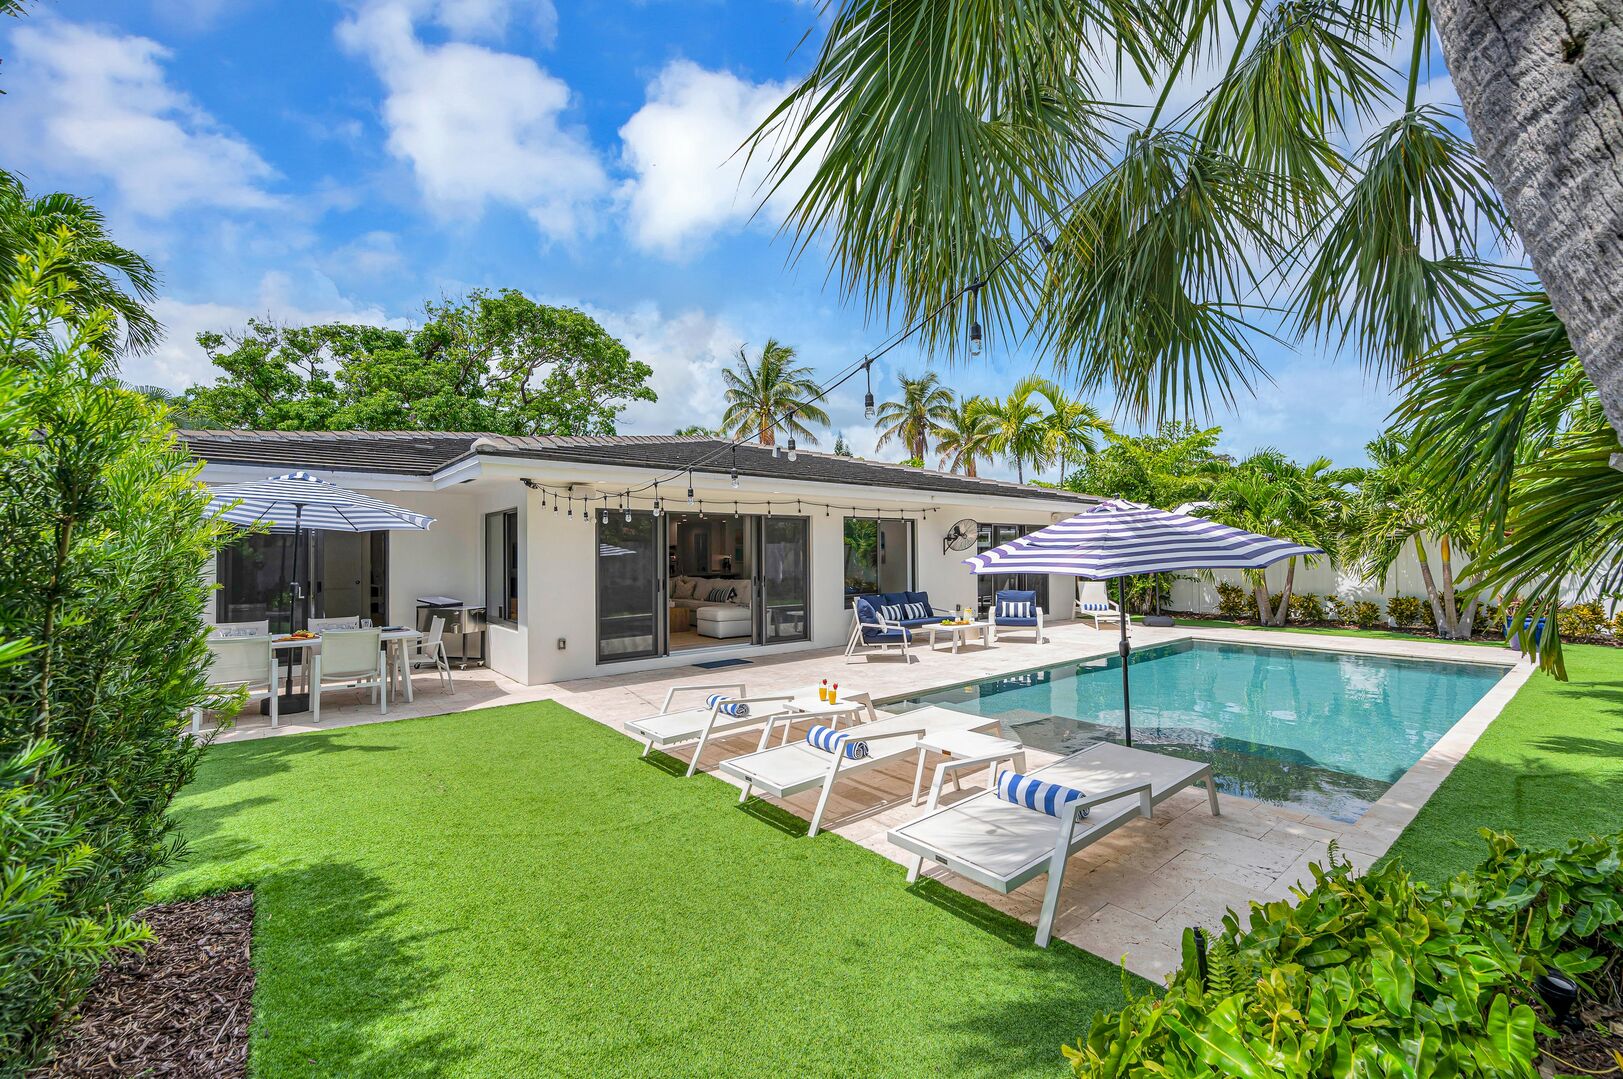 This modern coastal ranch style residence is a haven by definition, designed for tranquility.